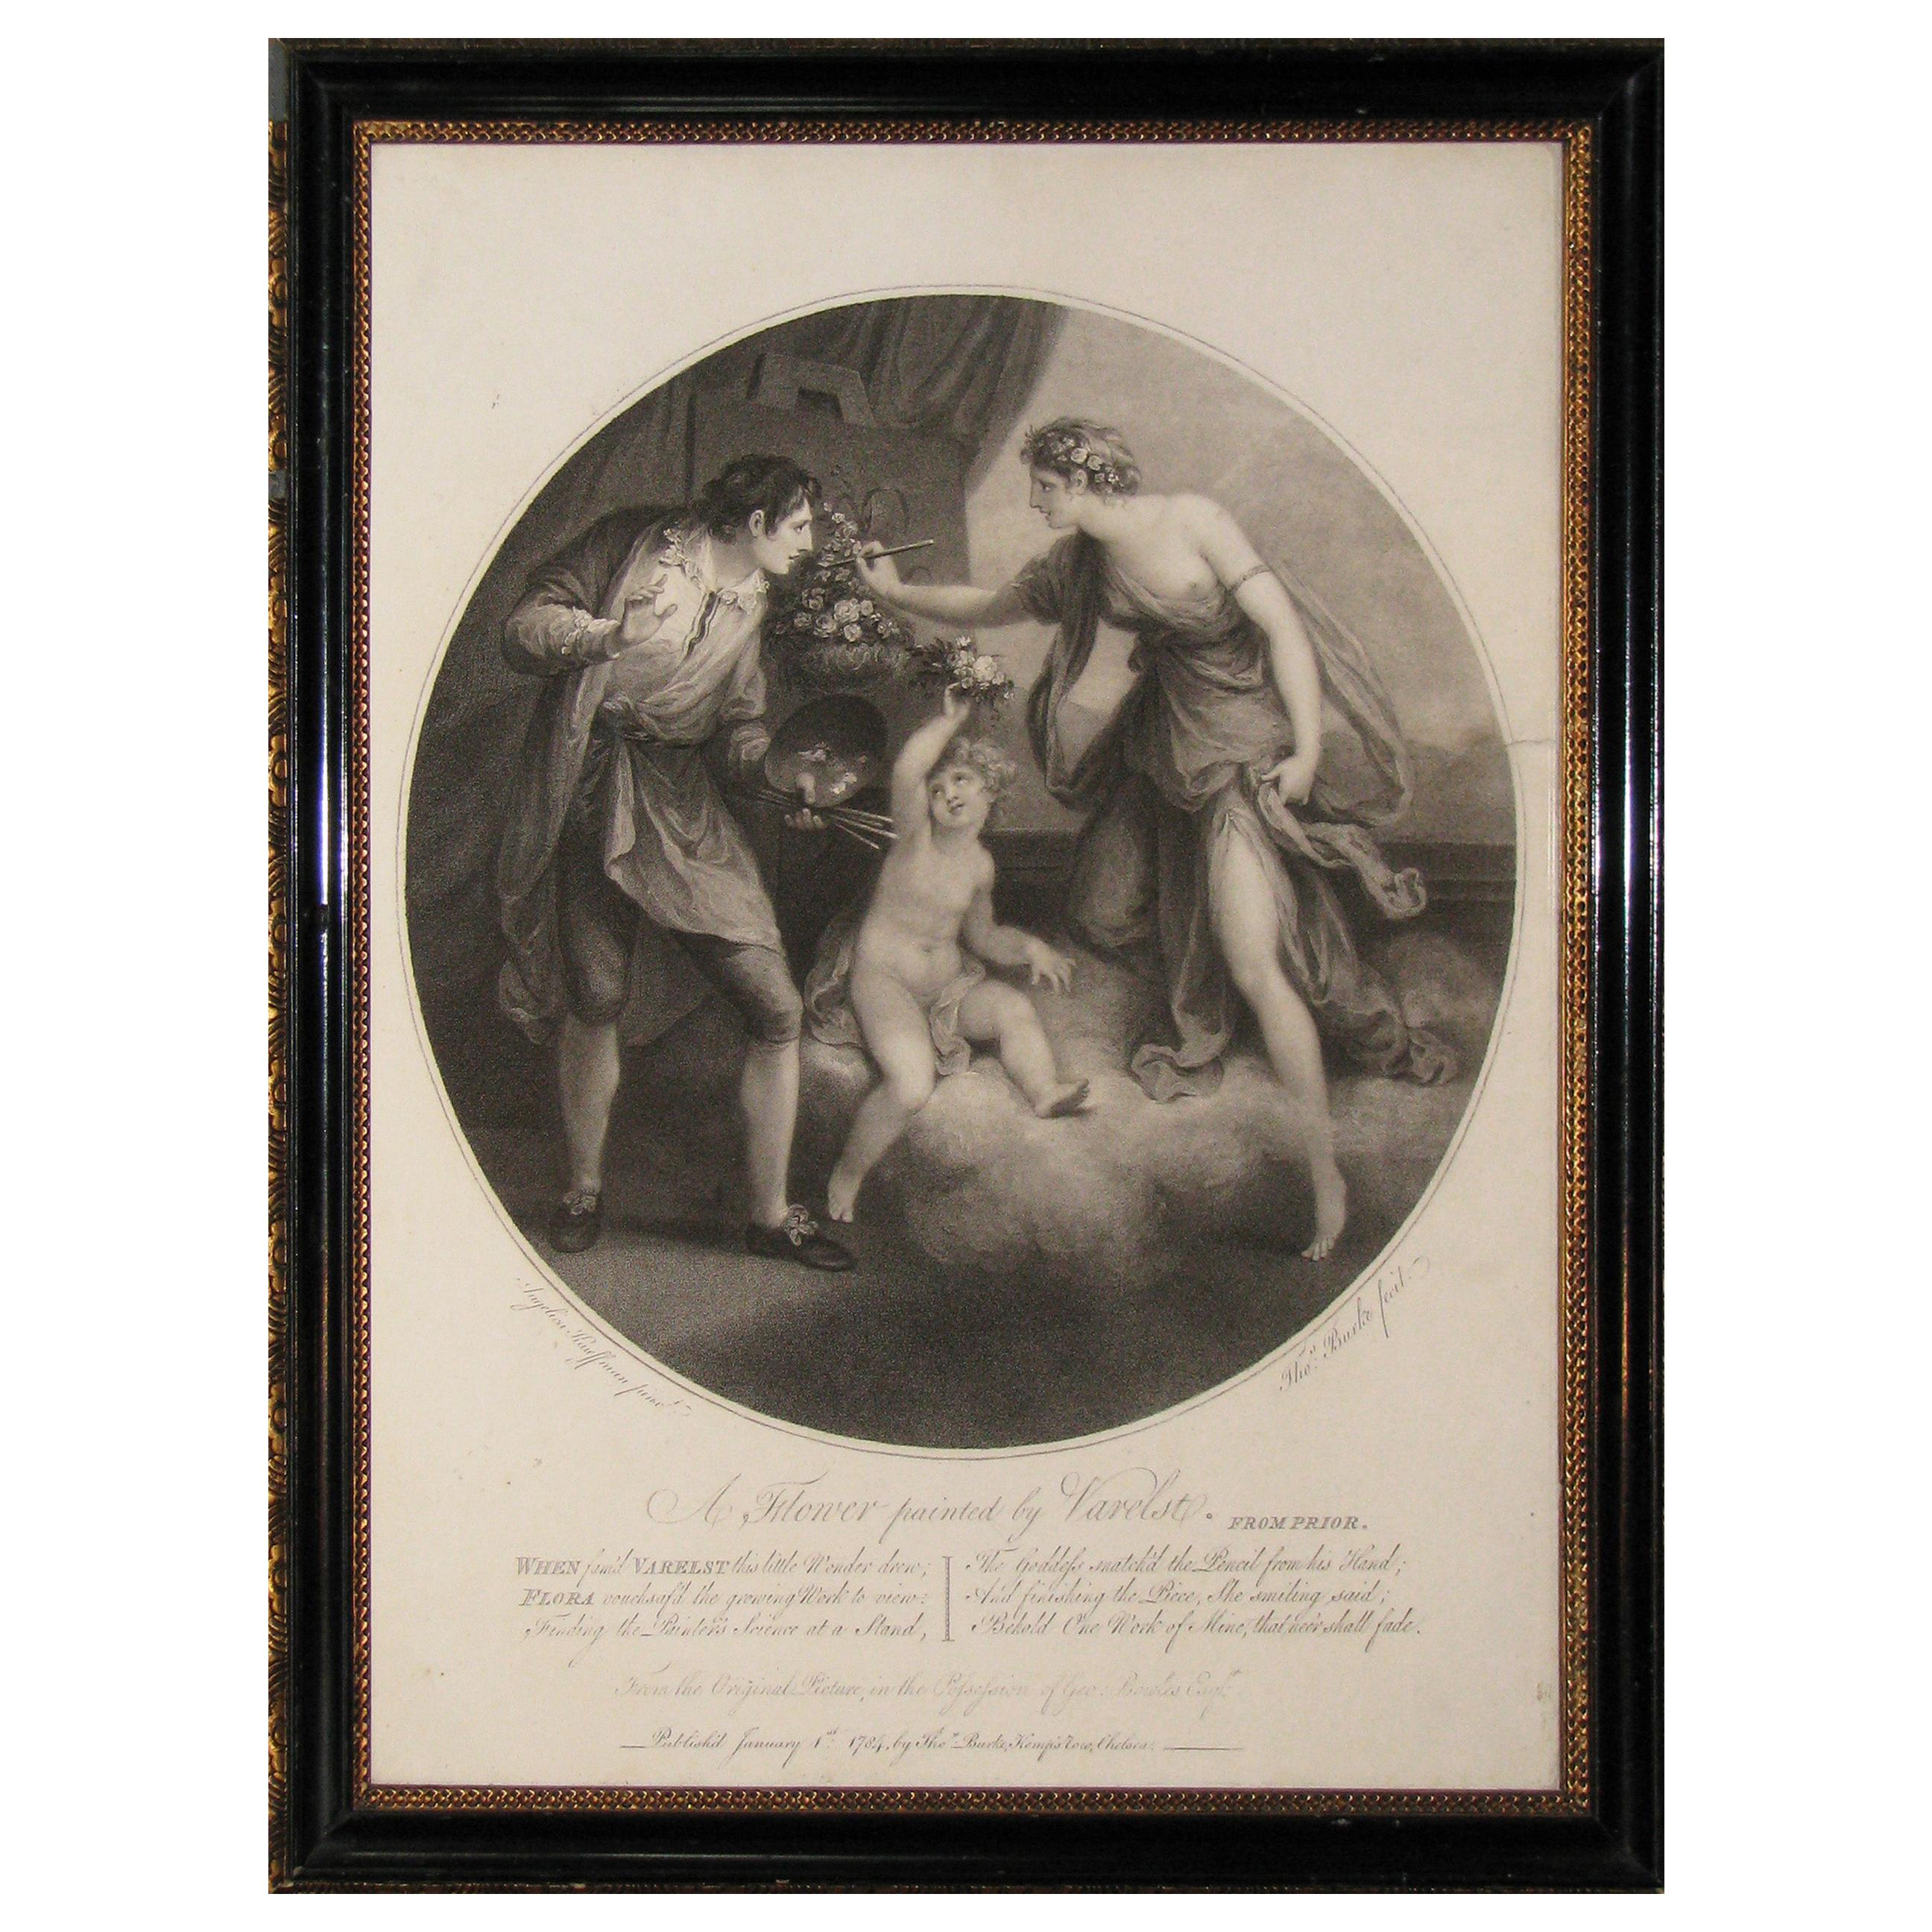 Flower Painted by Varelst. Stipple Engraving by T. Burke after Angelica Kauffman For Sale